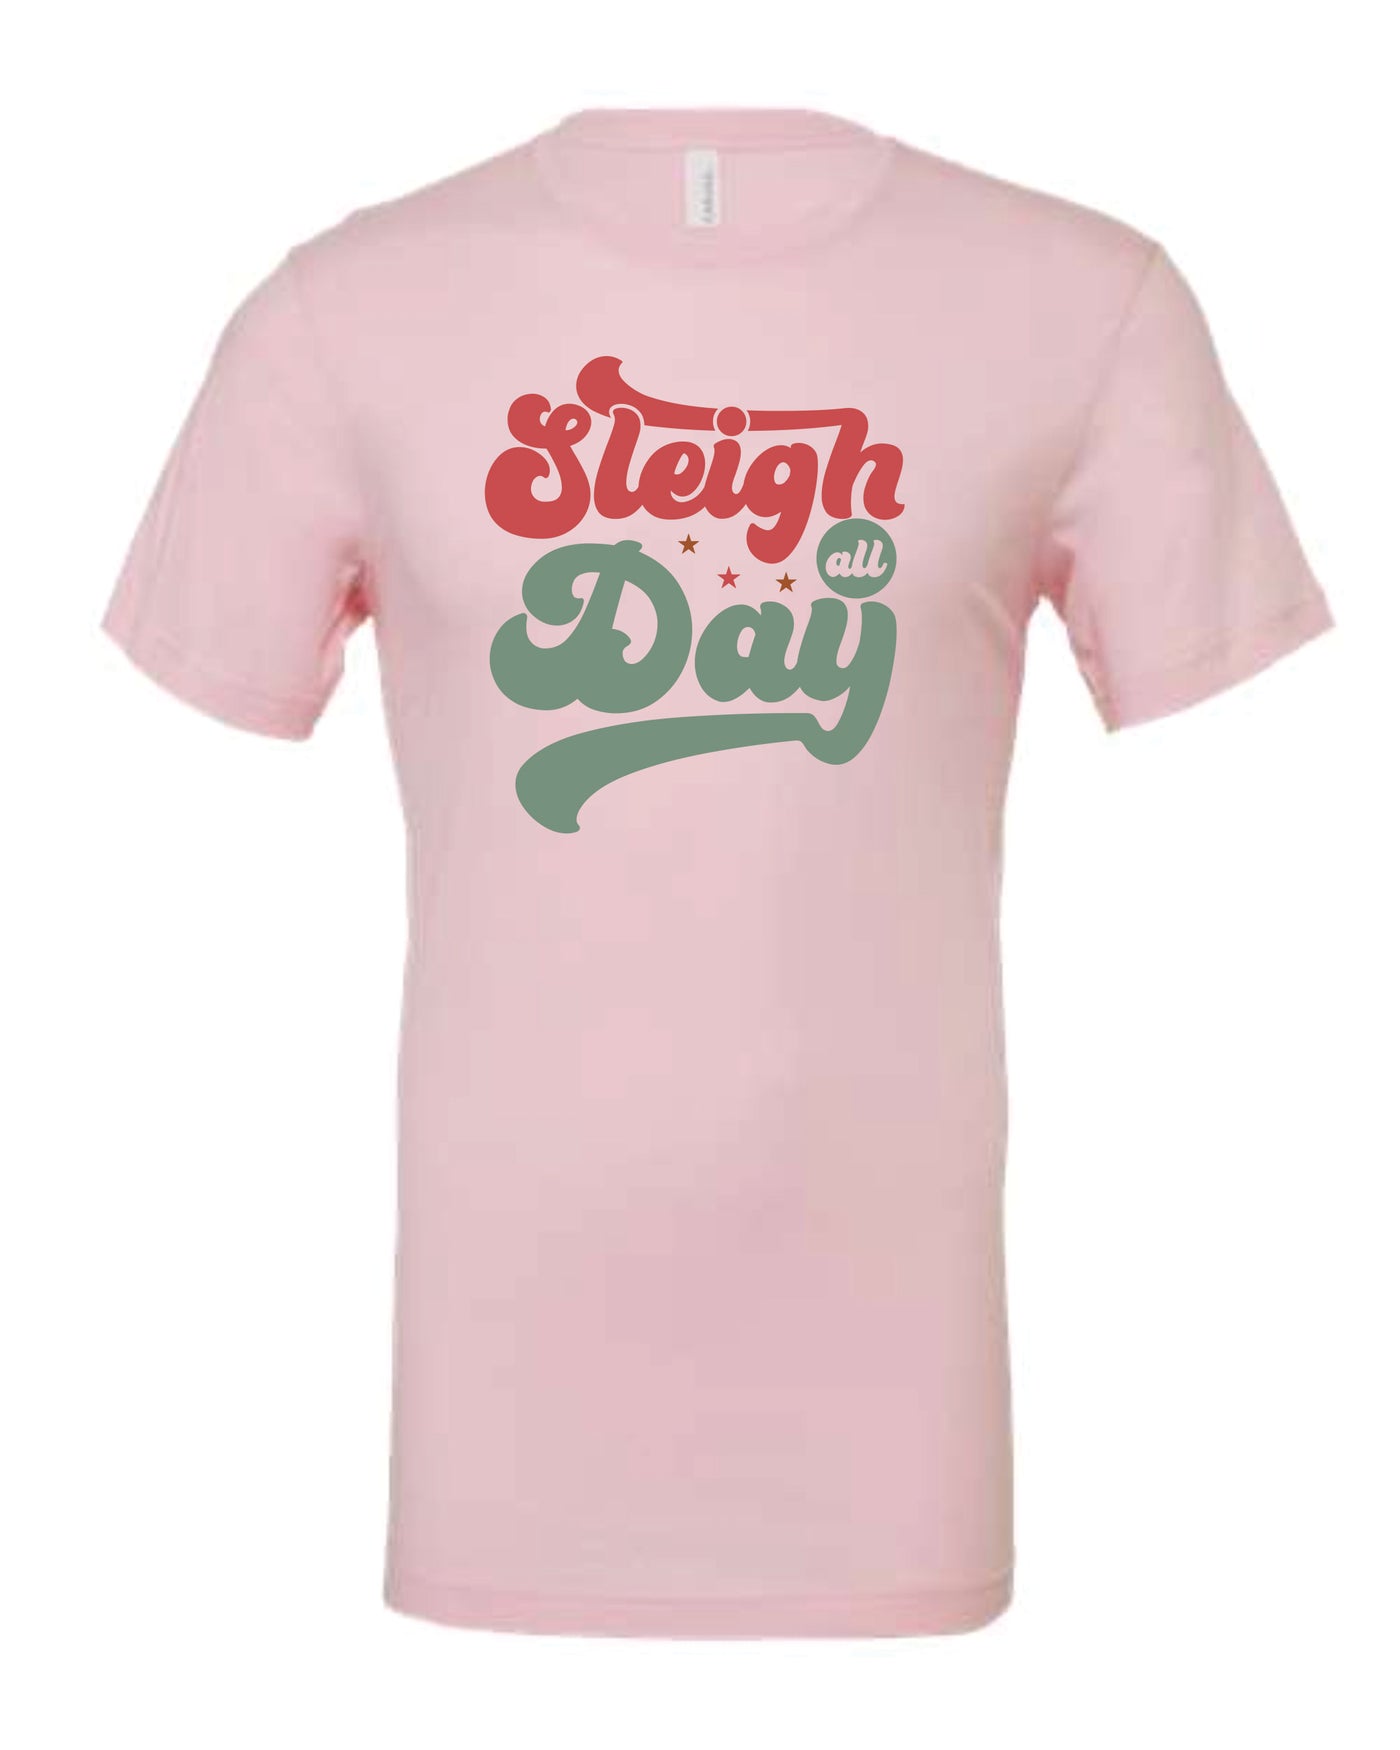 Sleigh all Day Short Sleeve Graphic Tee